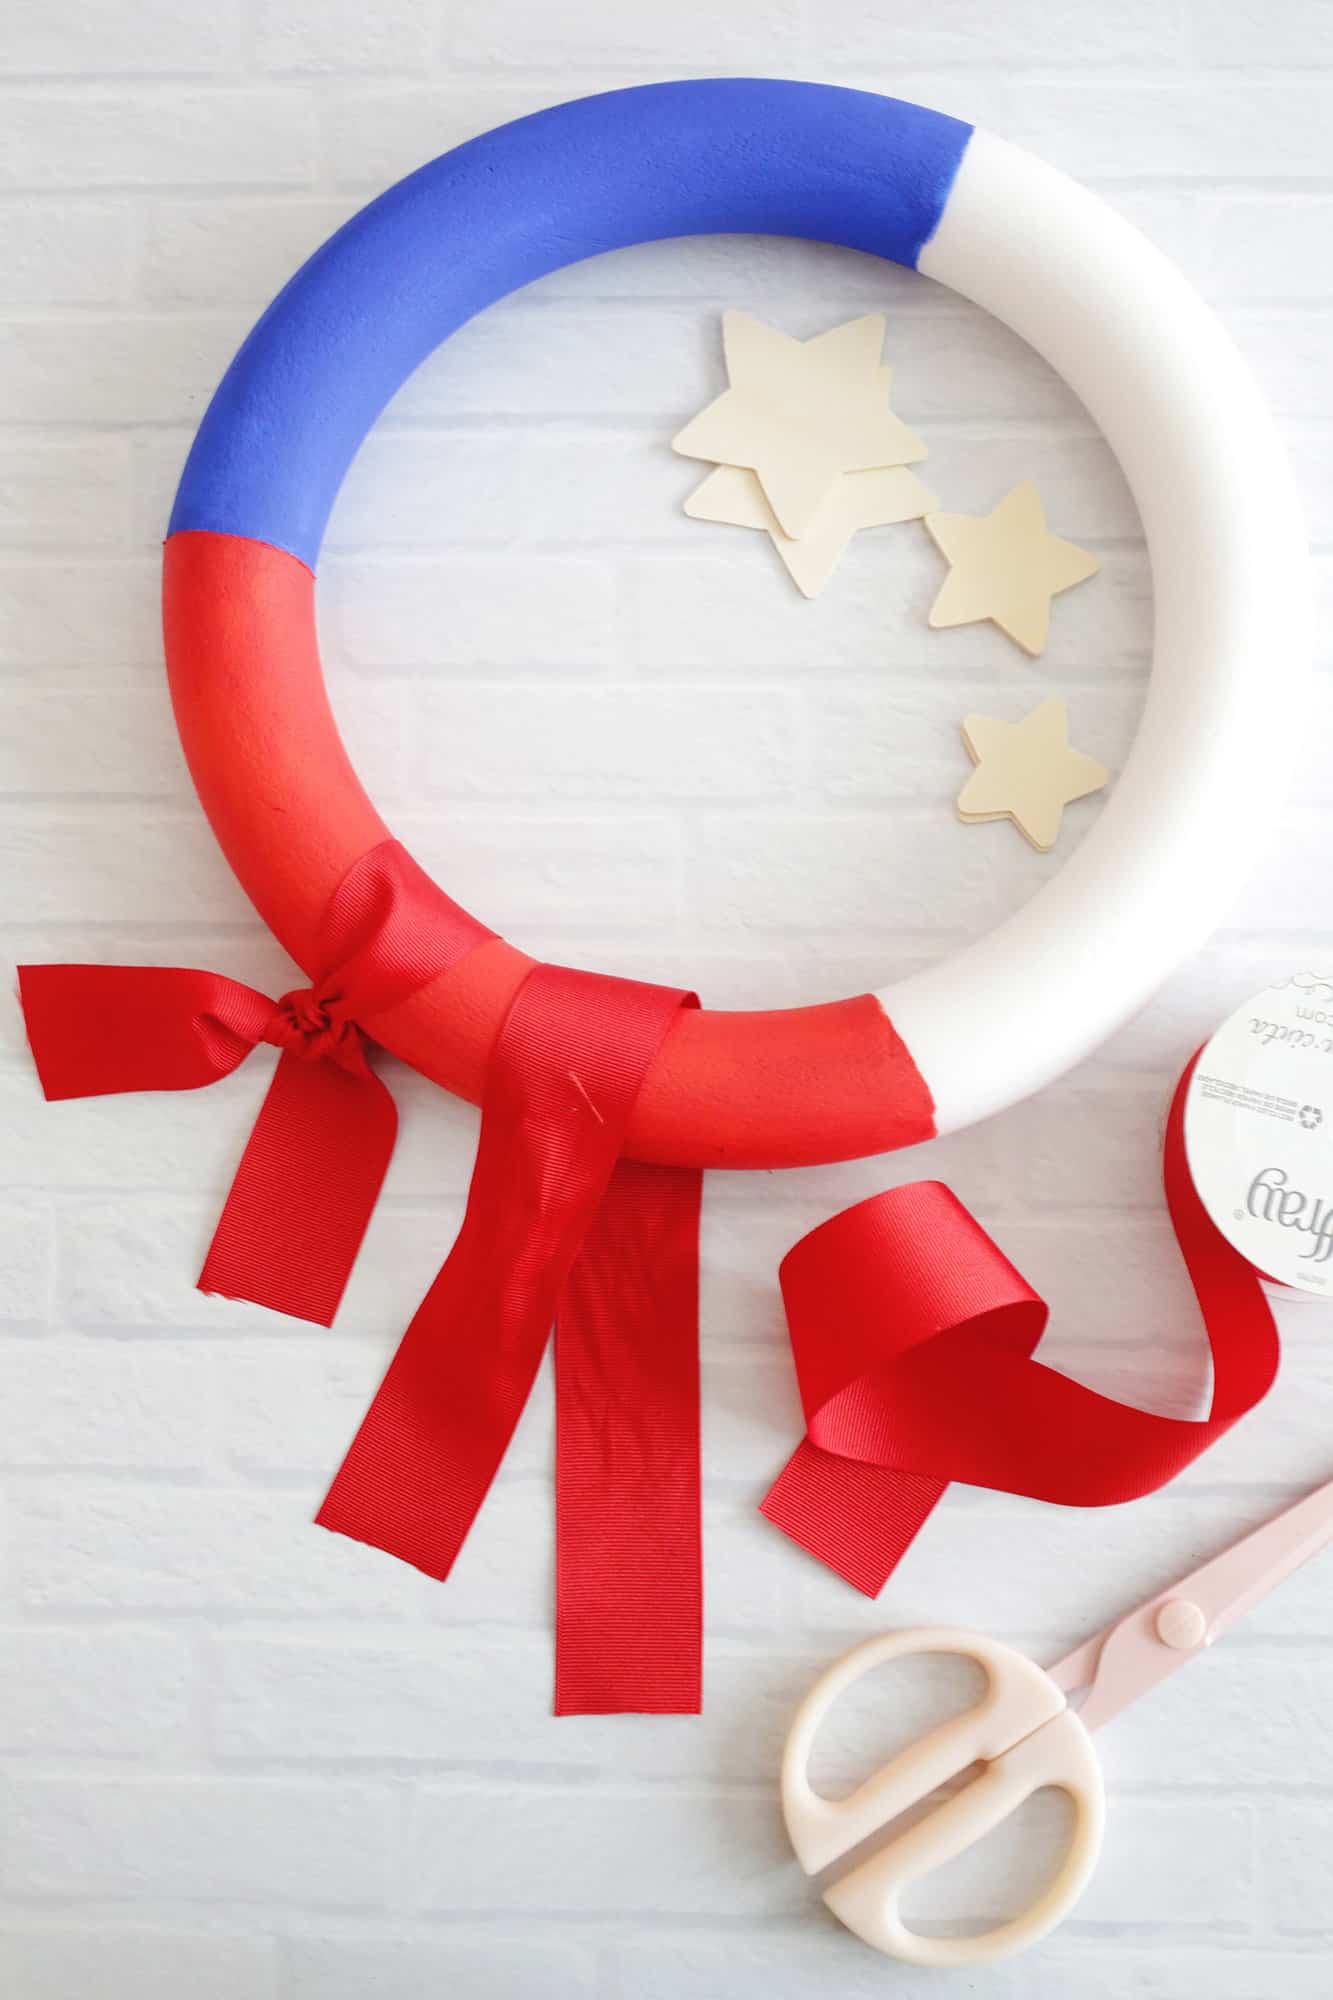 tying red ribbons around wreath